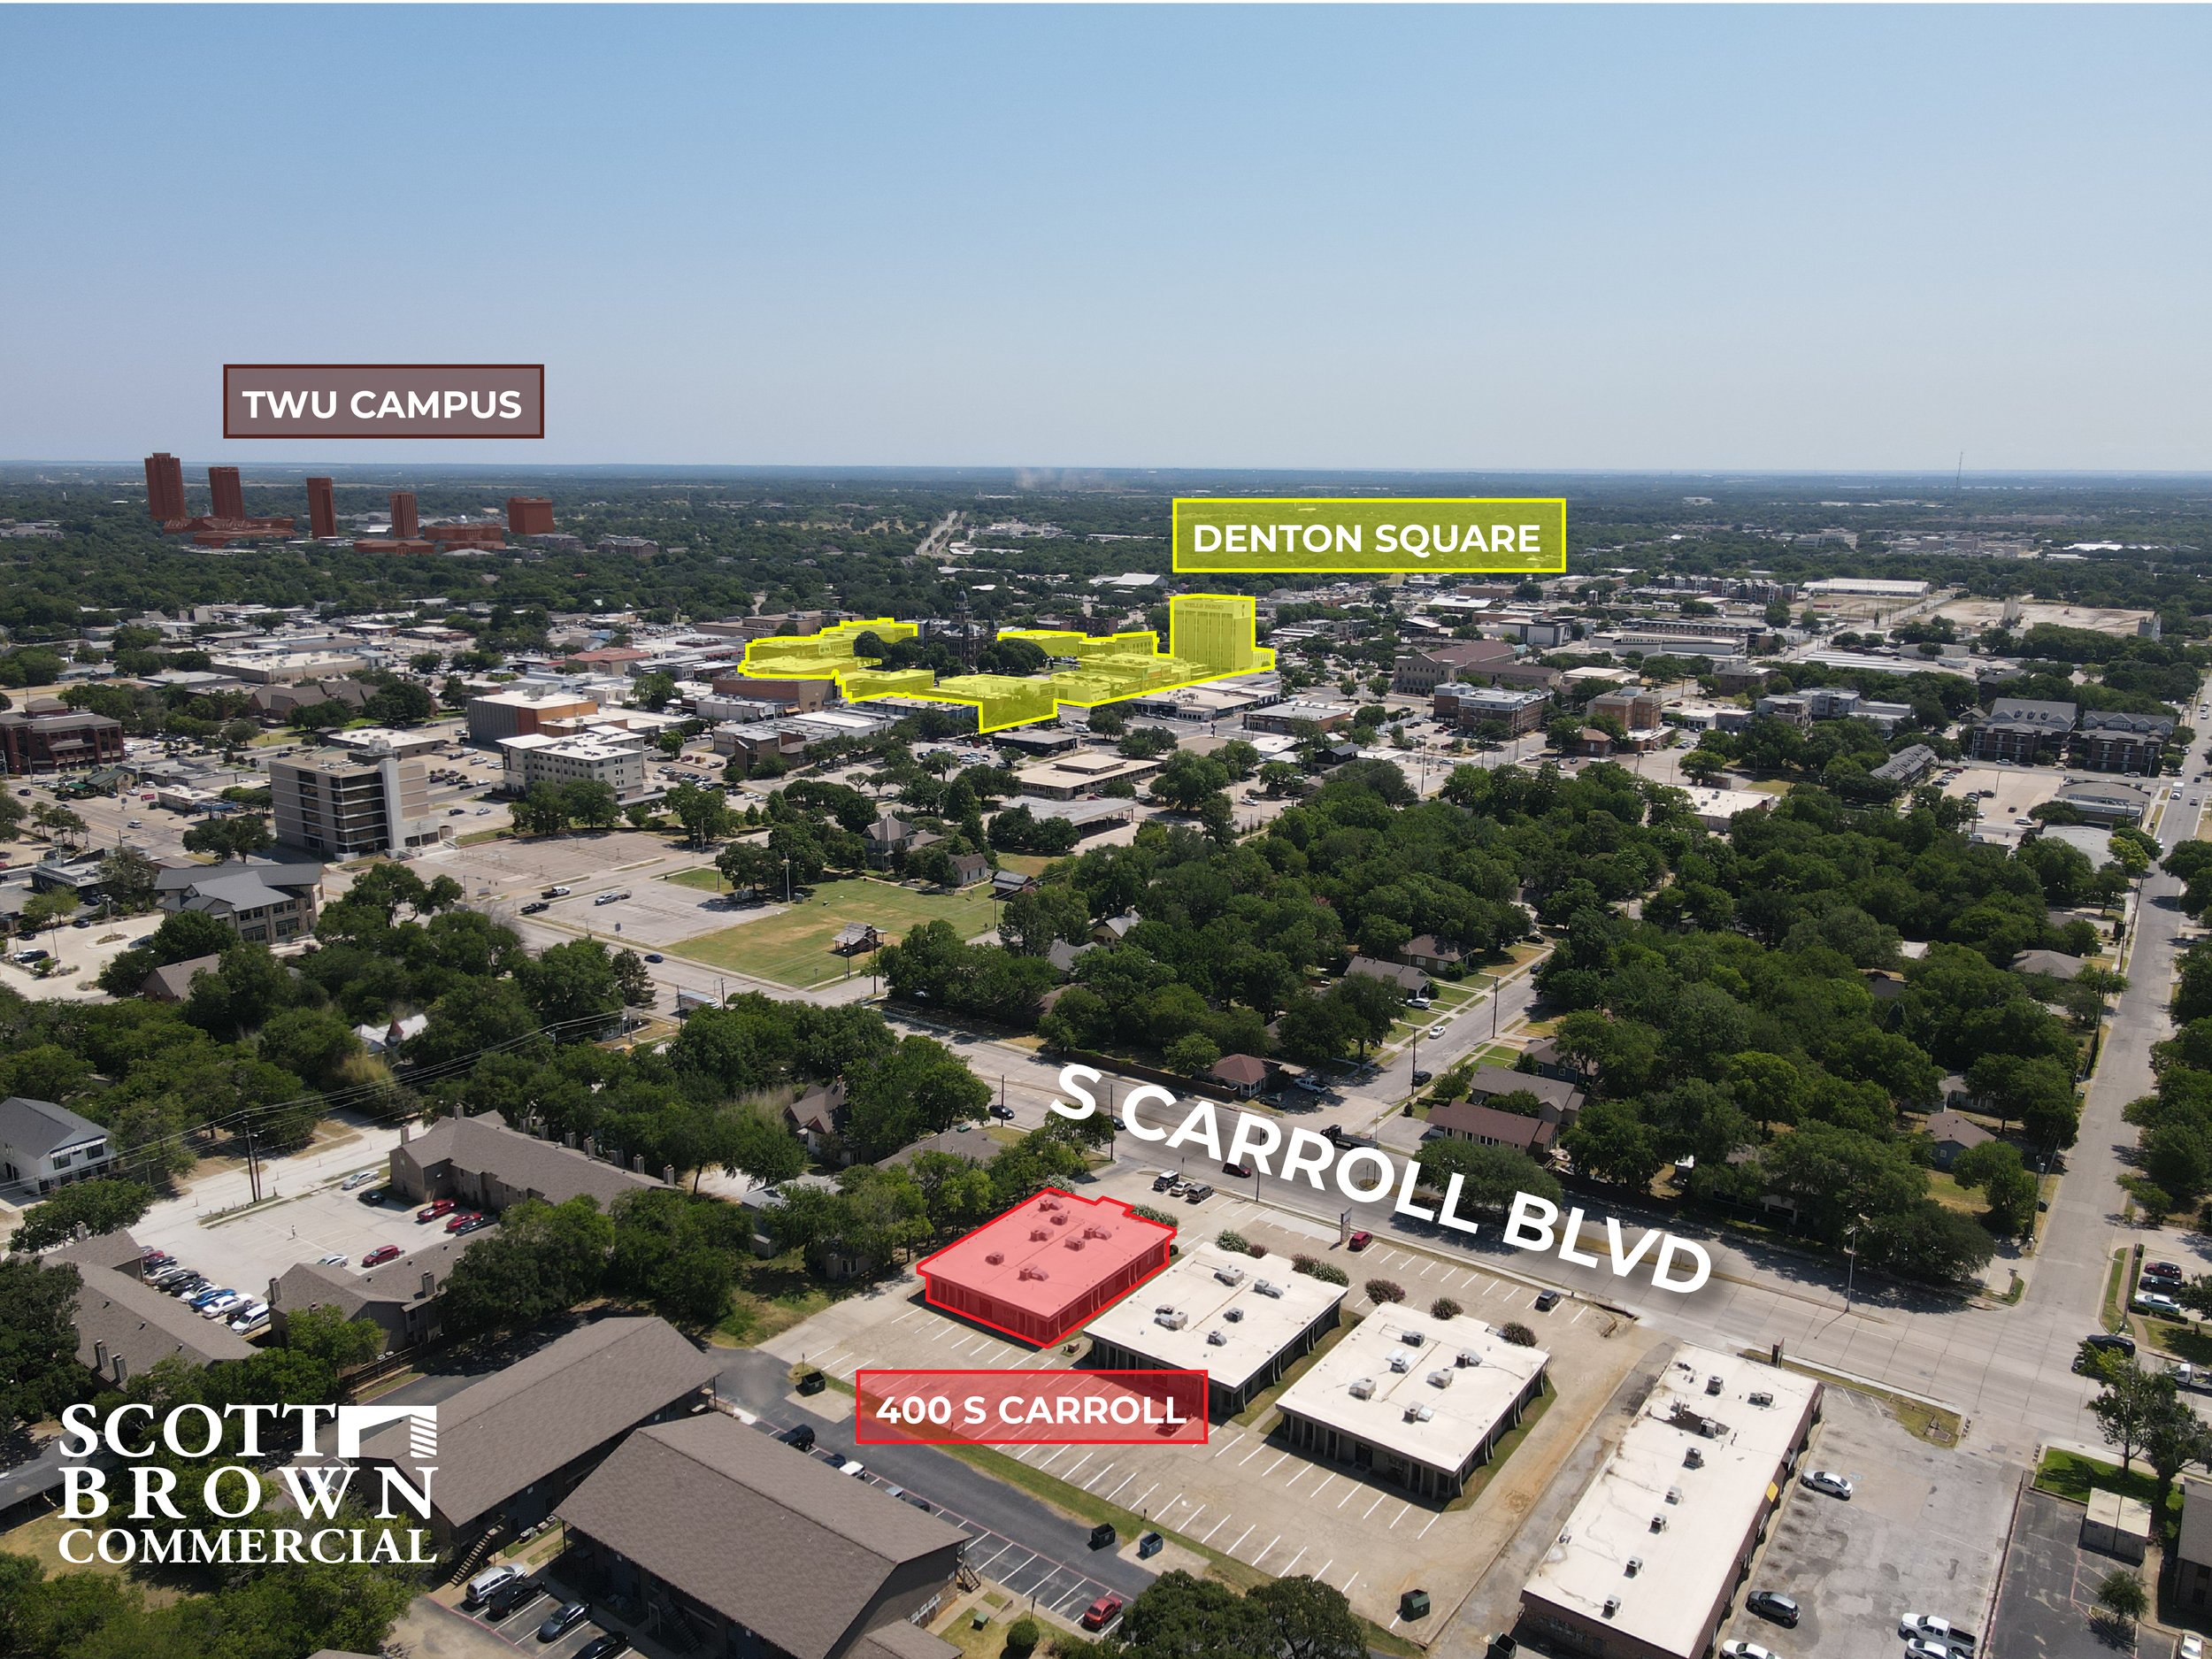  view of the neighborhood with 400 S Carroll Boulevard’s building highlighted in red 